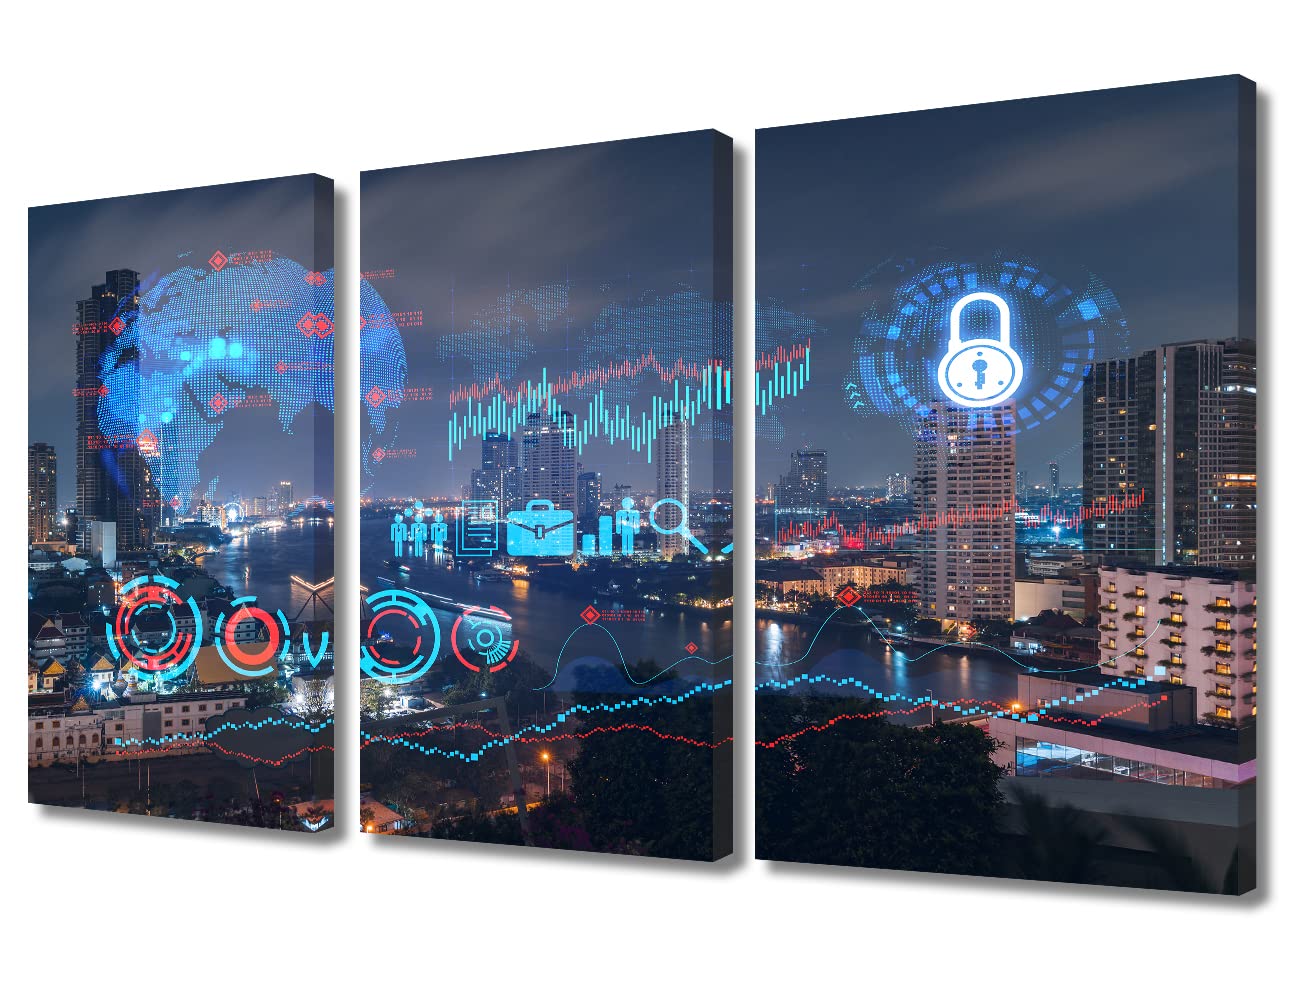 3 Panels City Night Scene as Background Hologram Paintings Modern Home Decor Smart City and Information Technology Abstract Canvas Paintings for Bedroom, Living Room Office Ready to Hang (36"Wx24"H) 36"Wx24"H Artwork-17